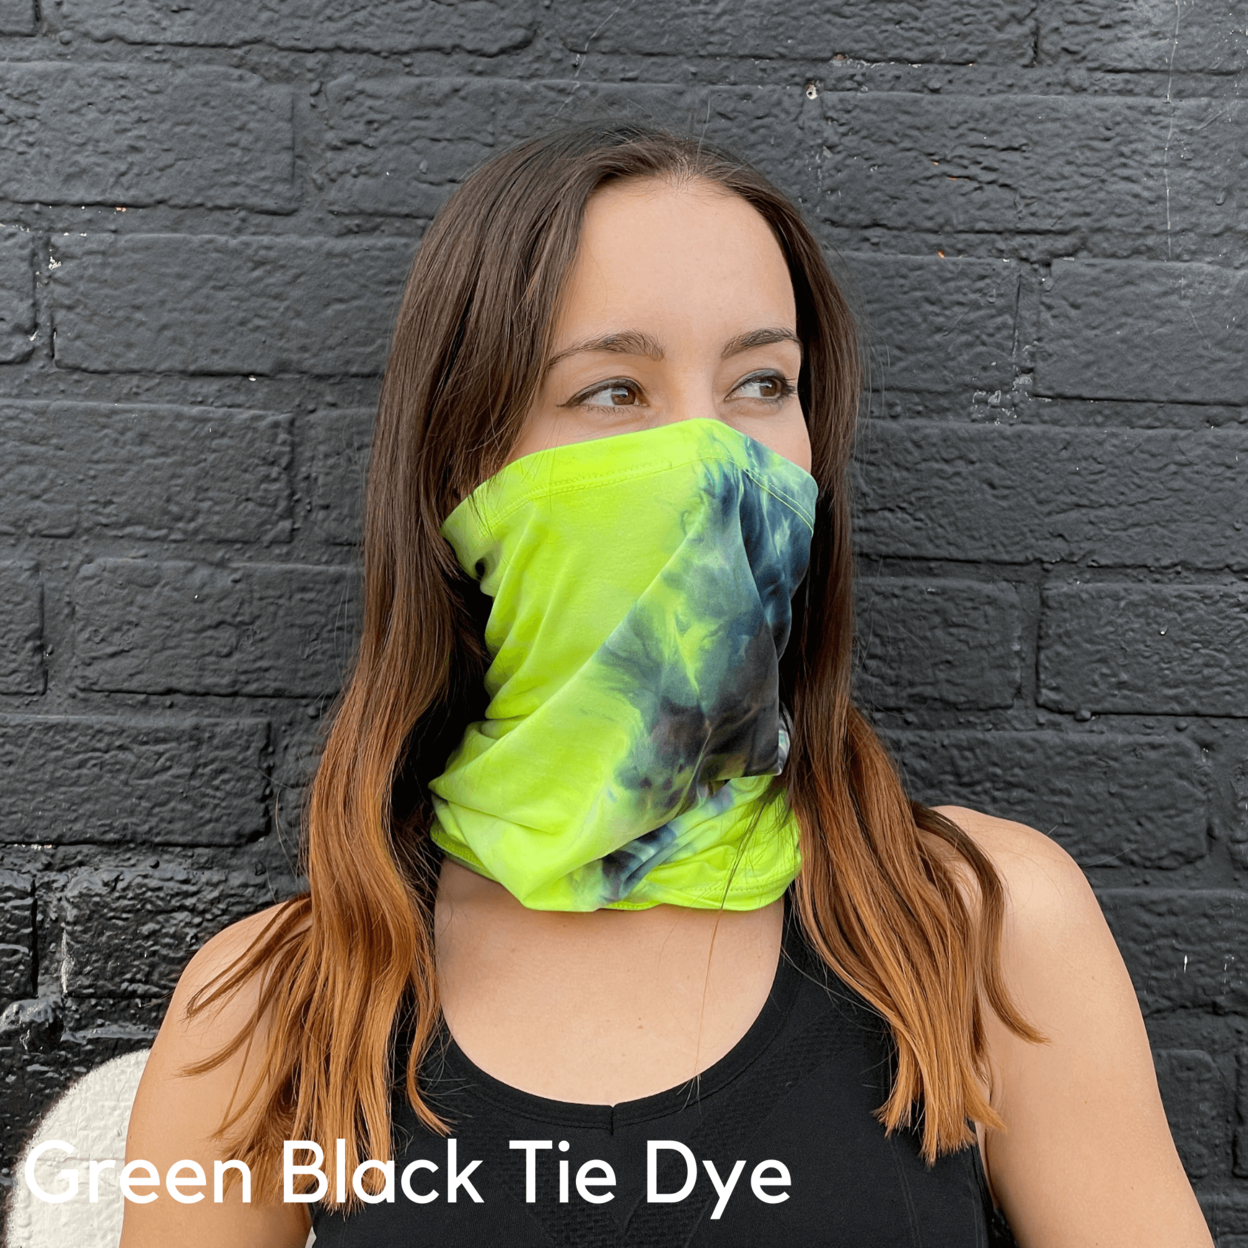 Sports Neck Gaiter Face Mask For Outdoor Activities - Green Black Tie Dye